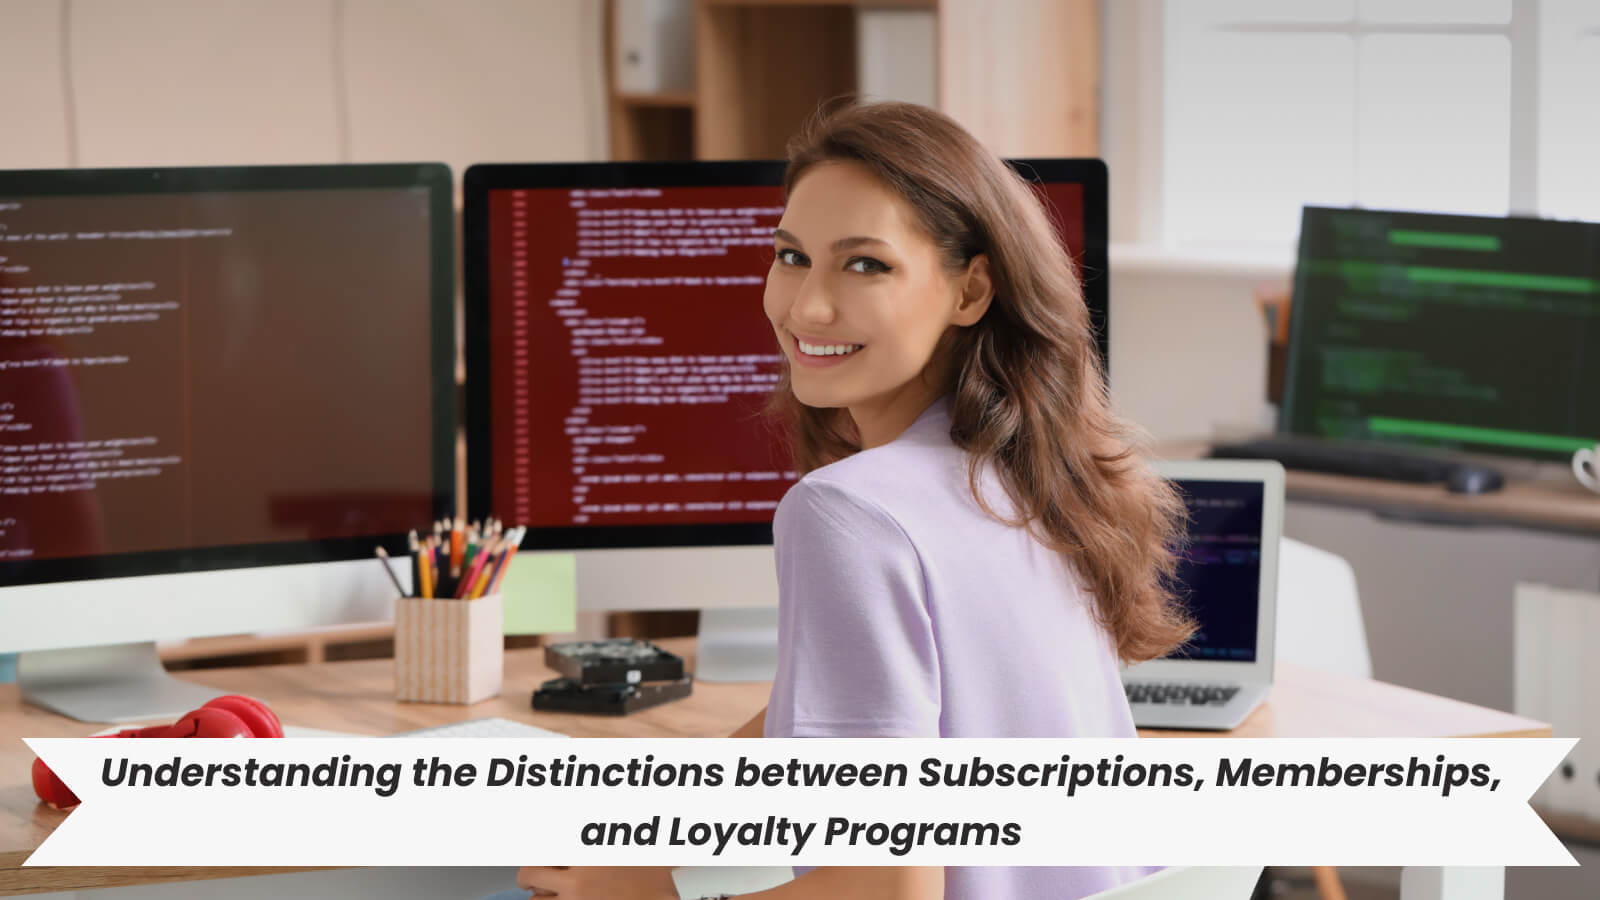 Understanding the Distinctions between Subscriptions, Memberships, and Loyalty Programs